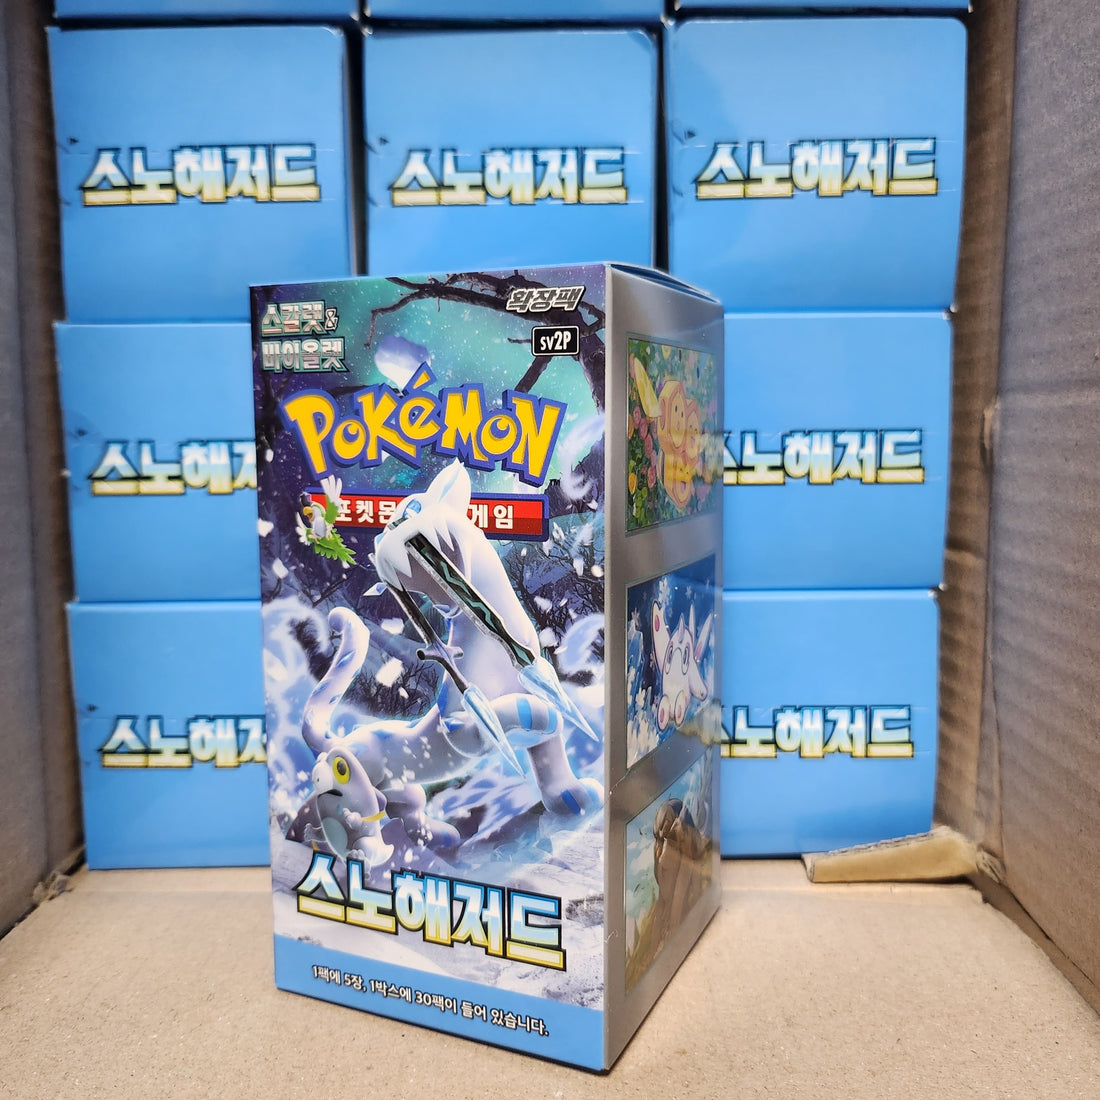 Information on changes to the seal of the Pokémon box